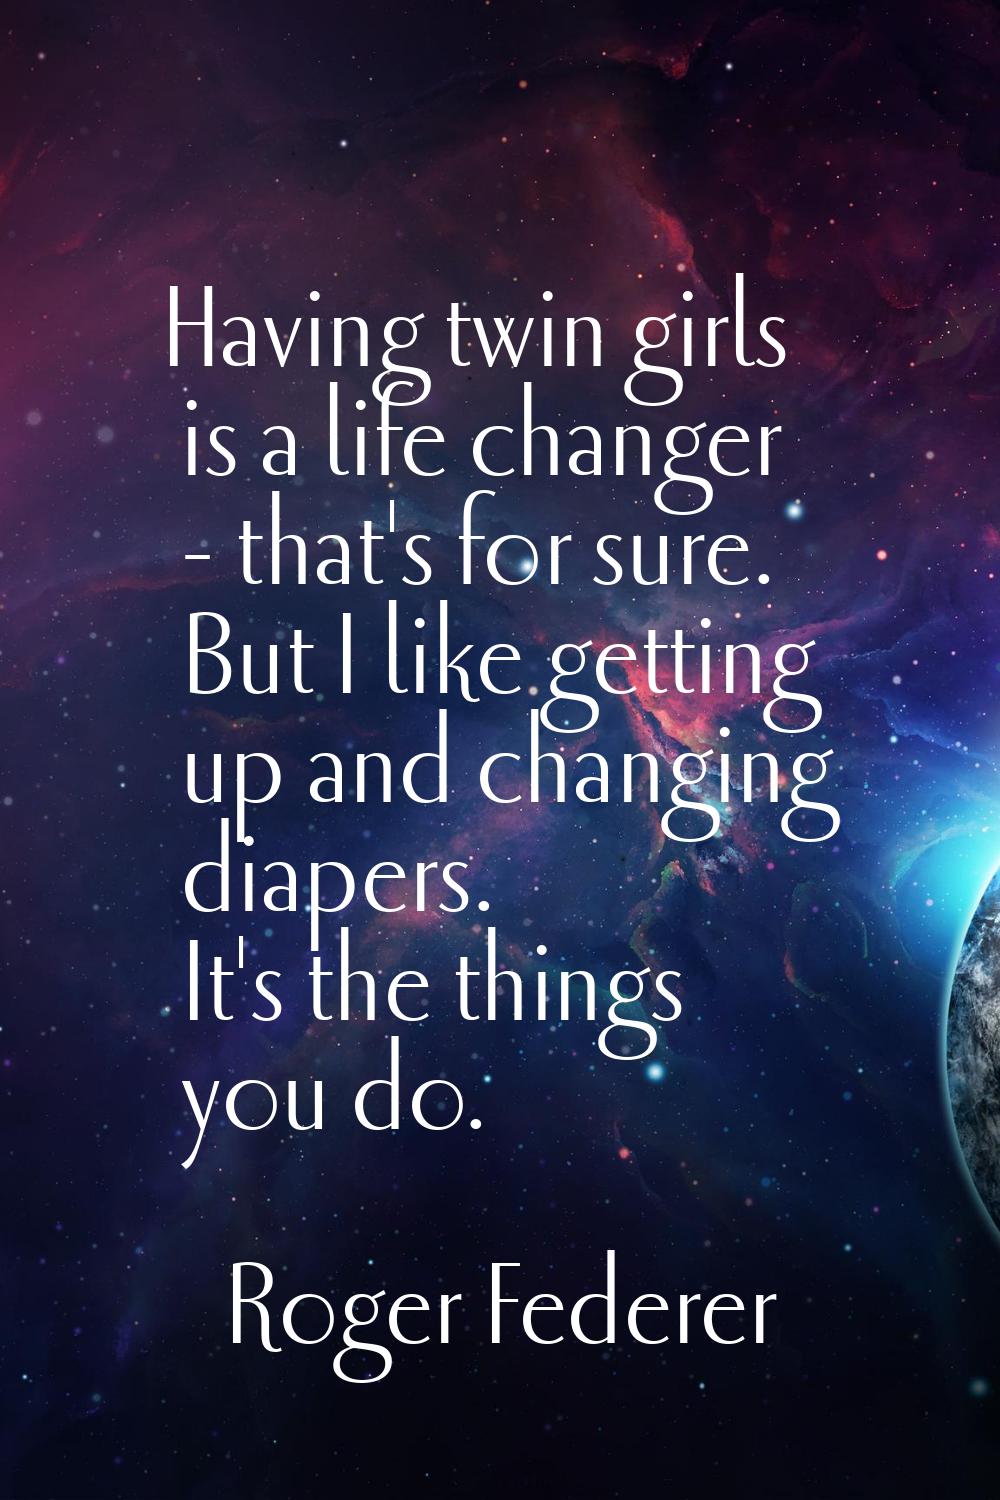 Having twin girls is a life changer - that's for sure. But I like getting up and changing diapers. 